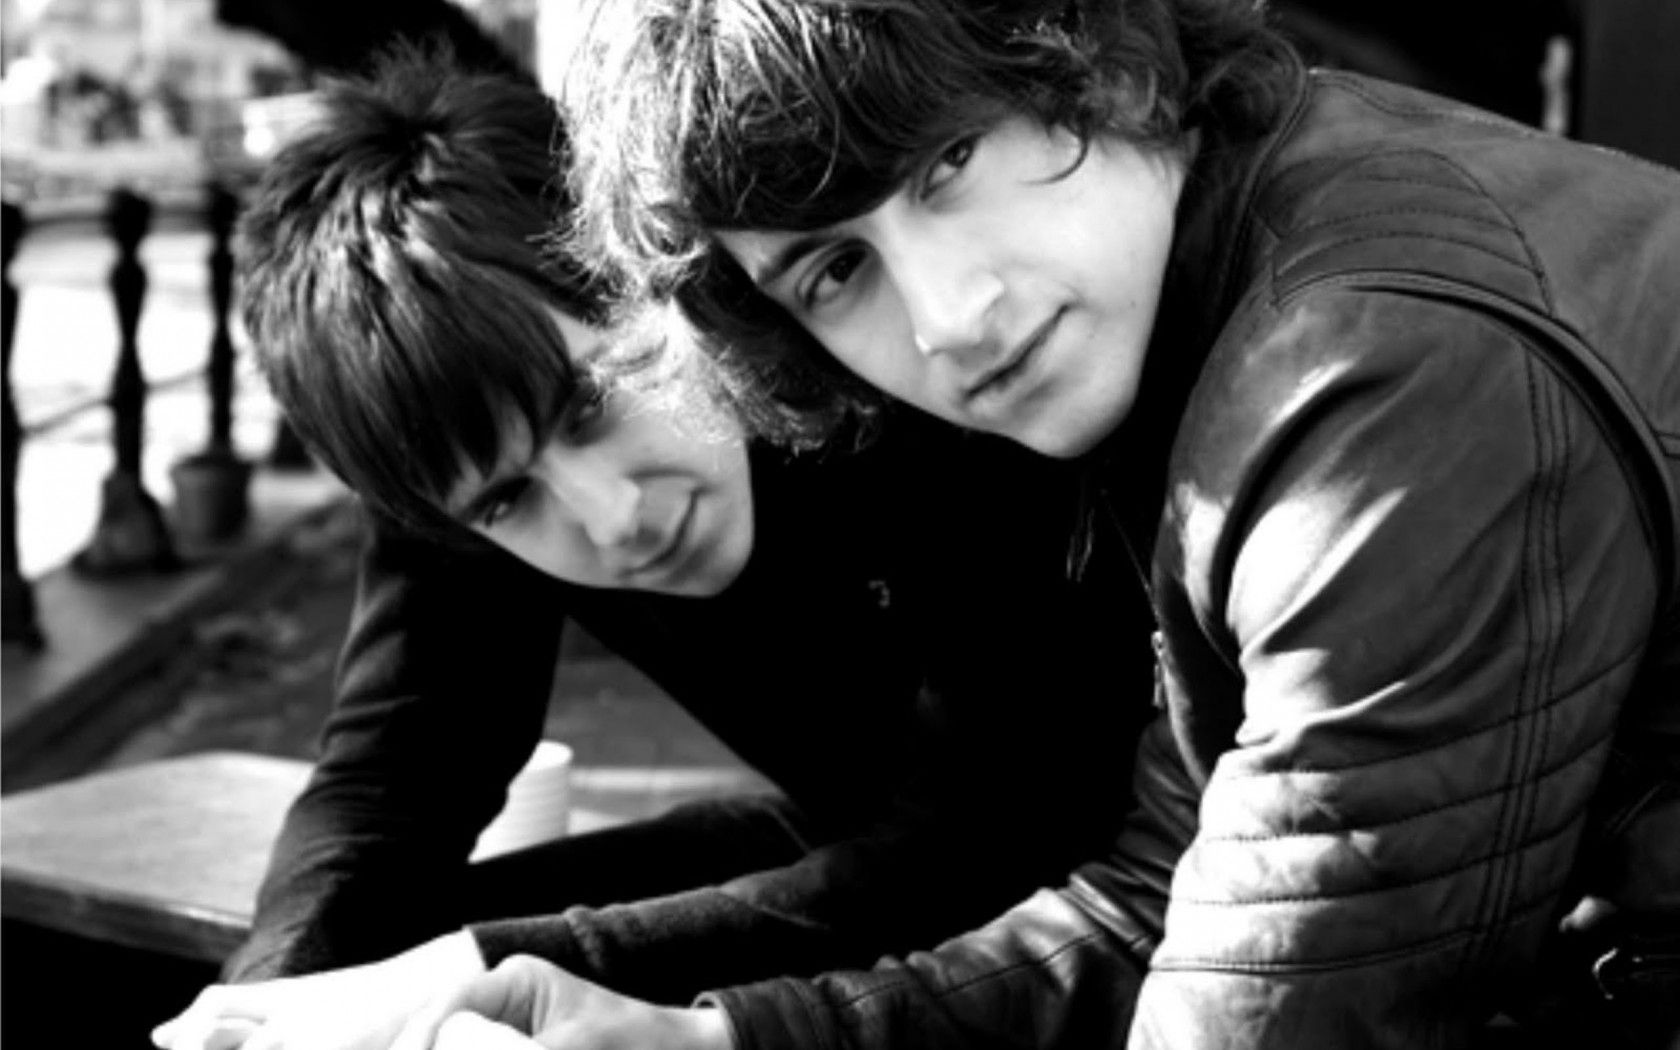 The Last Shadow Puppets Wallpaper. Shadow the Hedgehog Wallpaper, Scary Shadow Wallpaper and Shadow Demon Wallpaper